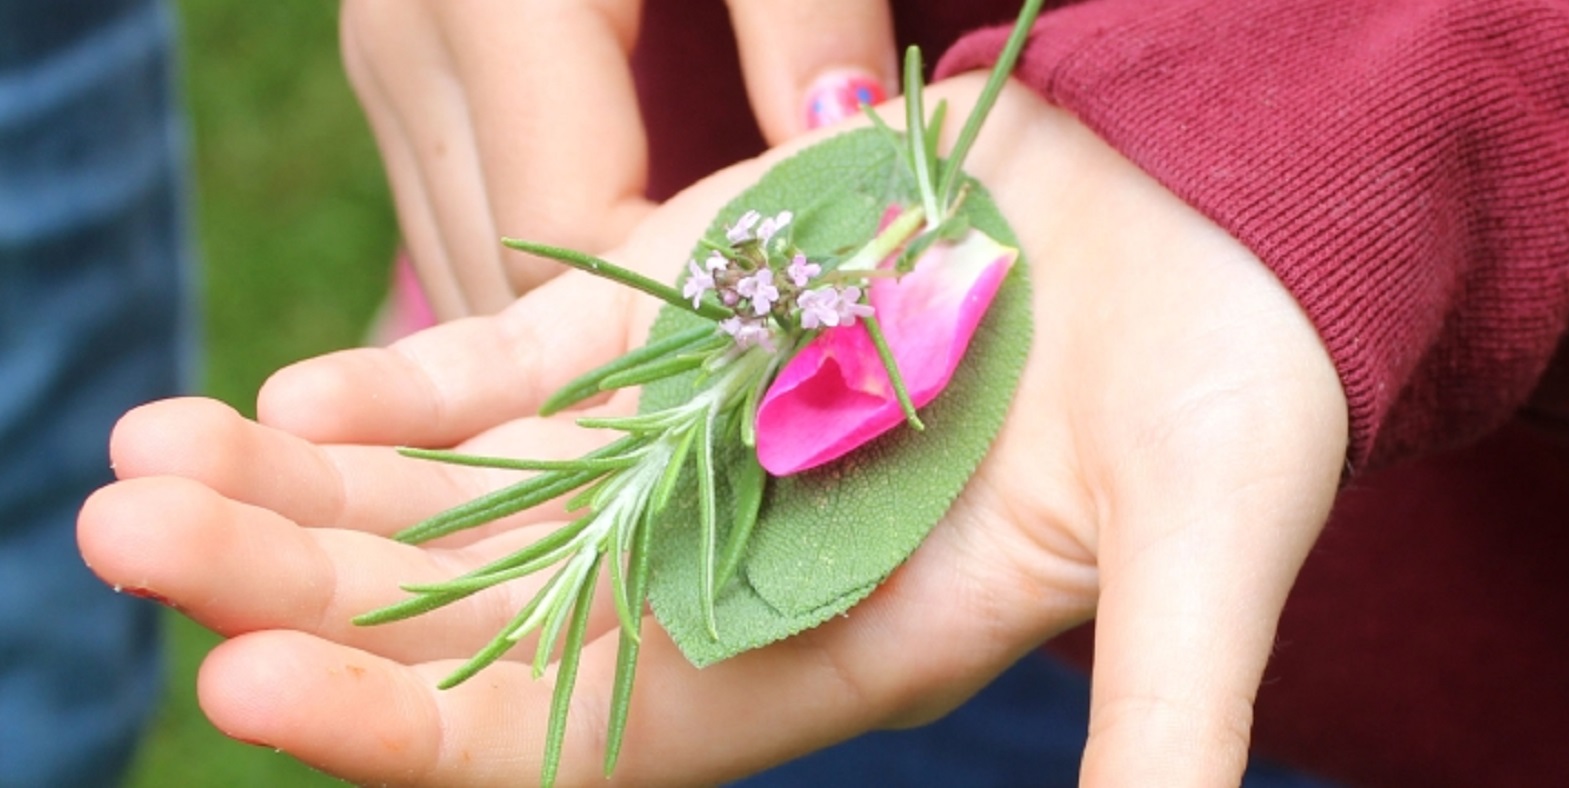 Herbs held in a child's hand.